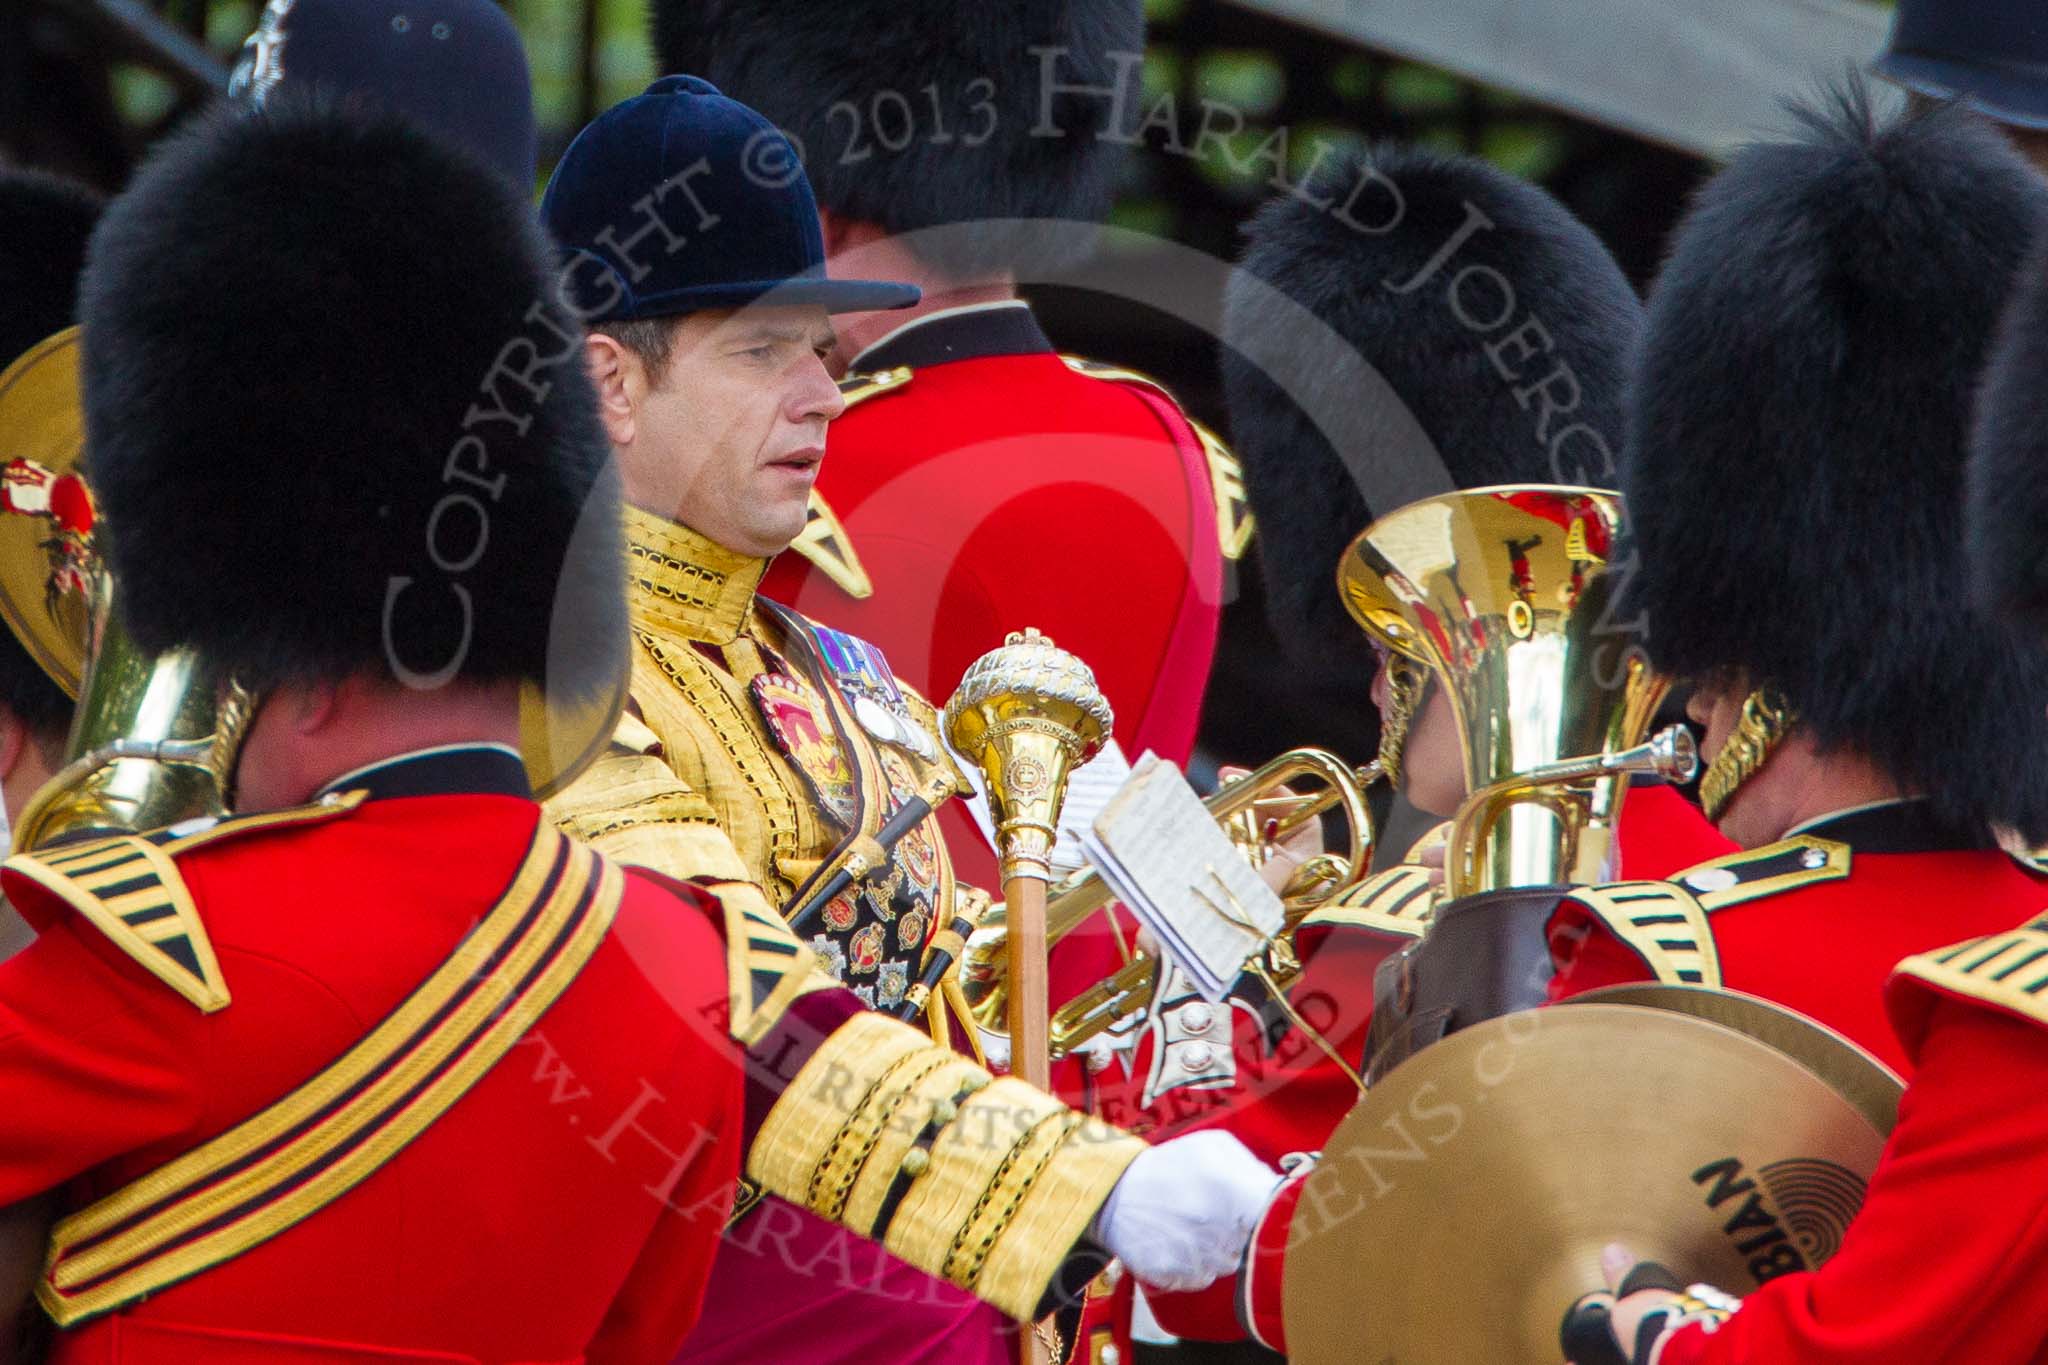 Trooping the Colour 2013: The Band of the Coldstream Guards about to change direction, Senior Drum Major Matthew Betts marching back between the lines of musicians. Image #47, 15 June 2013 10:13 Horse Guards Parade, London, UK